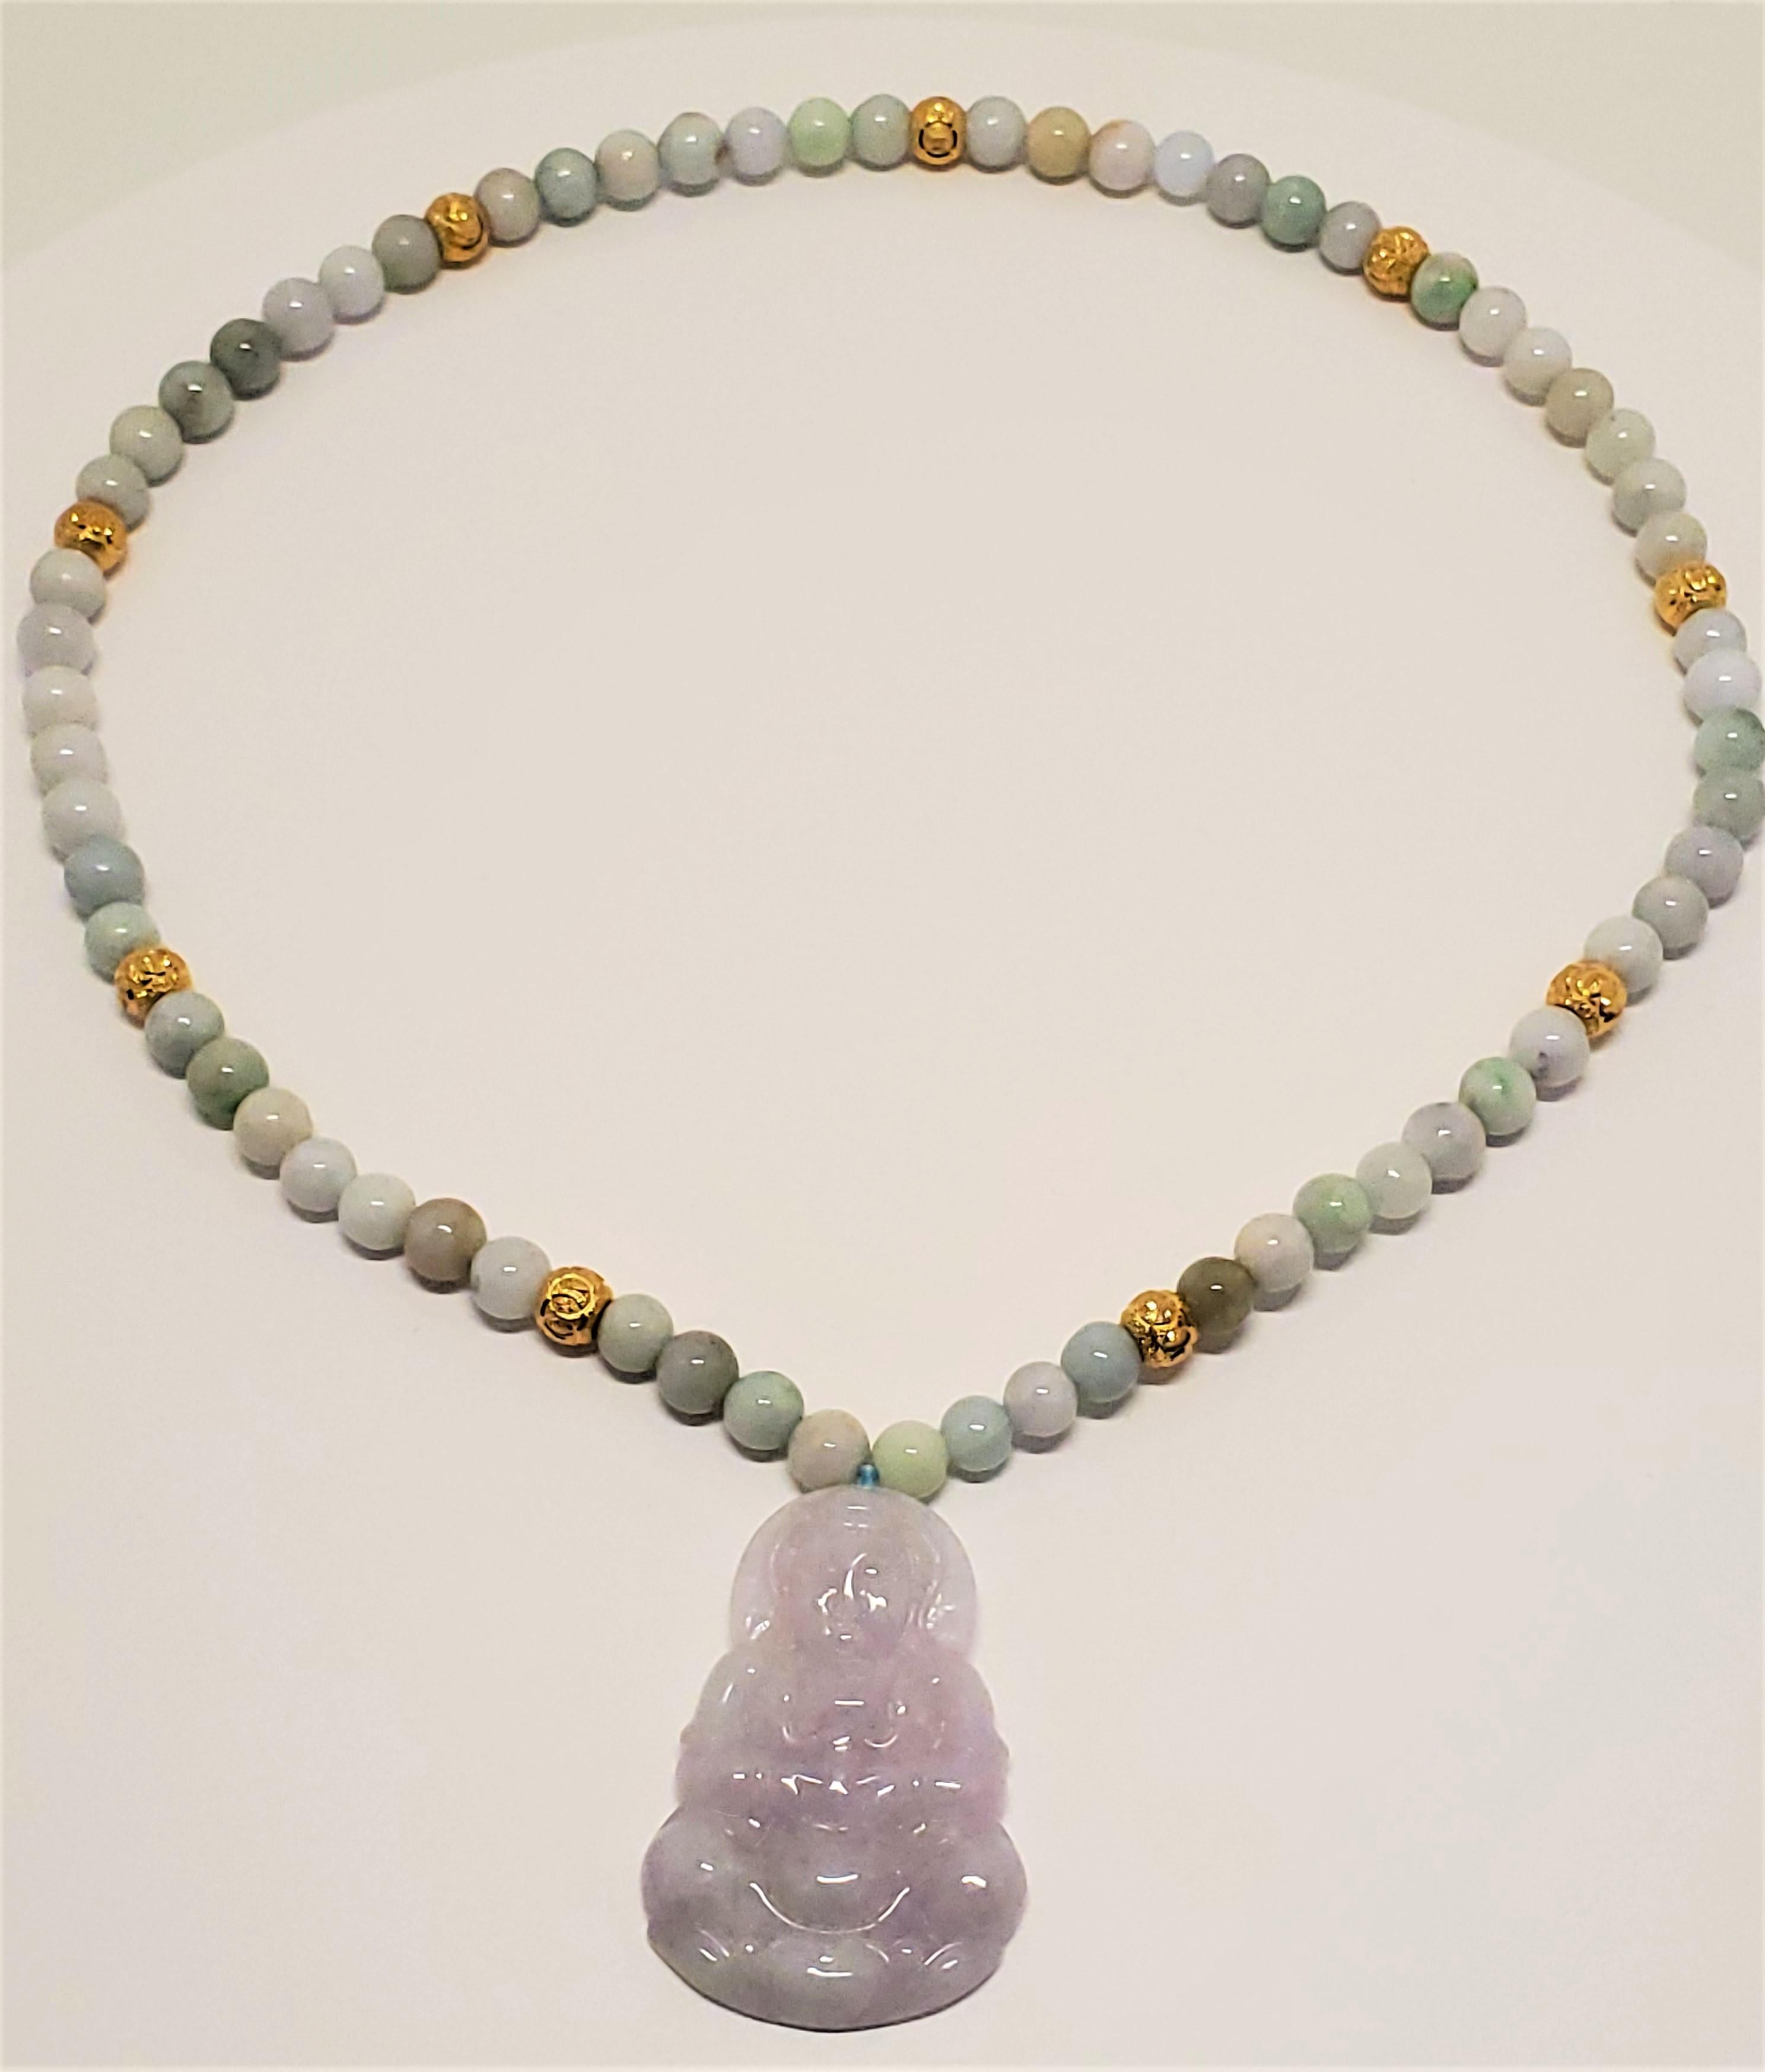 This vintage Burmese jadeite and gold beaded necklace consists of 64 round beads, 8 mm in diameter, of colours varying from white, celedon, and lavender to other pleasing pastel colours. Interspersed between the jadeite beads are 9 carvedd 24k